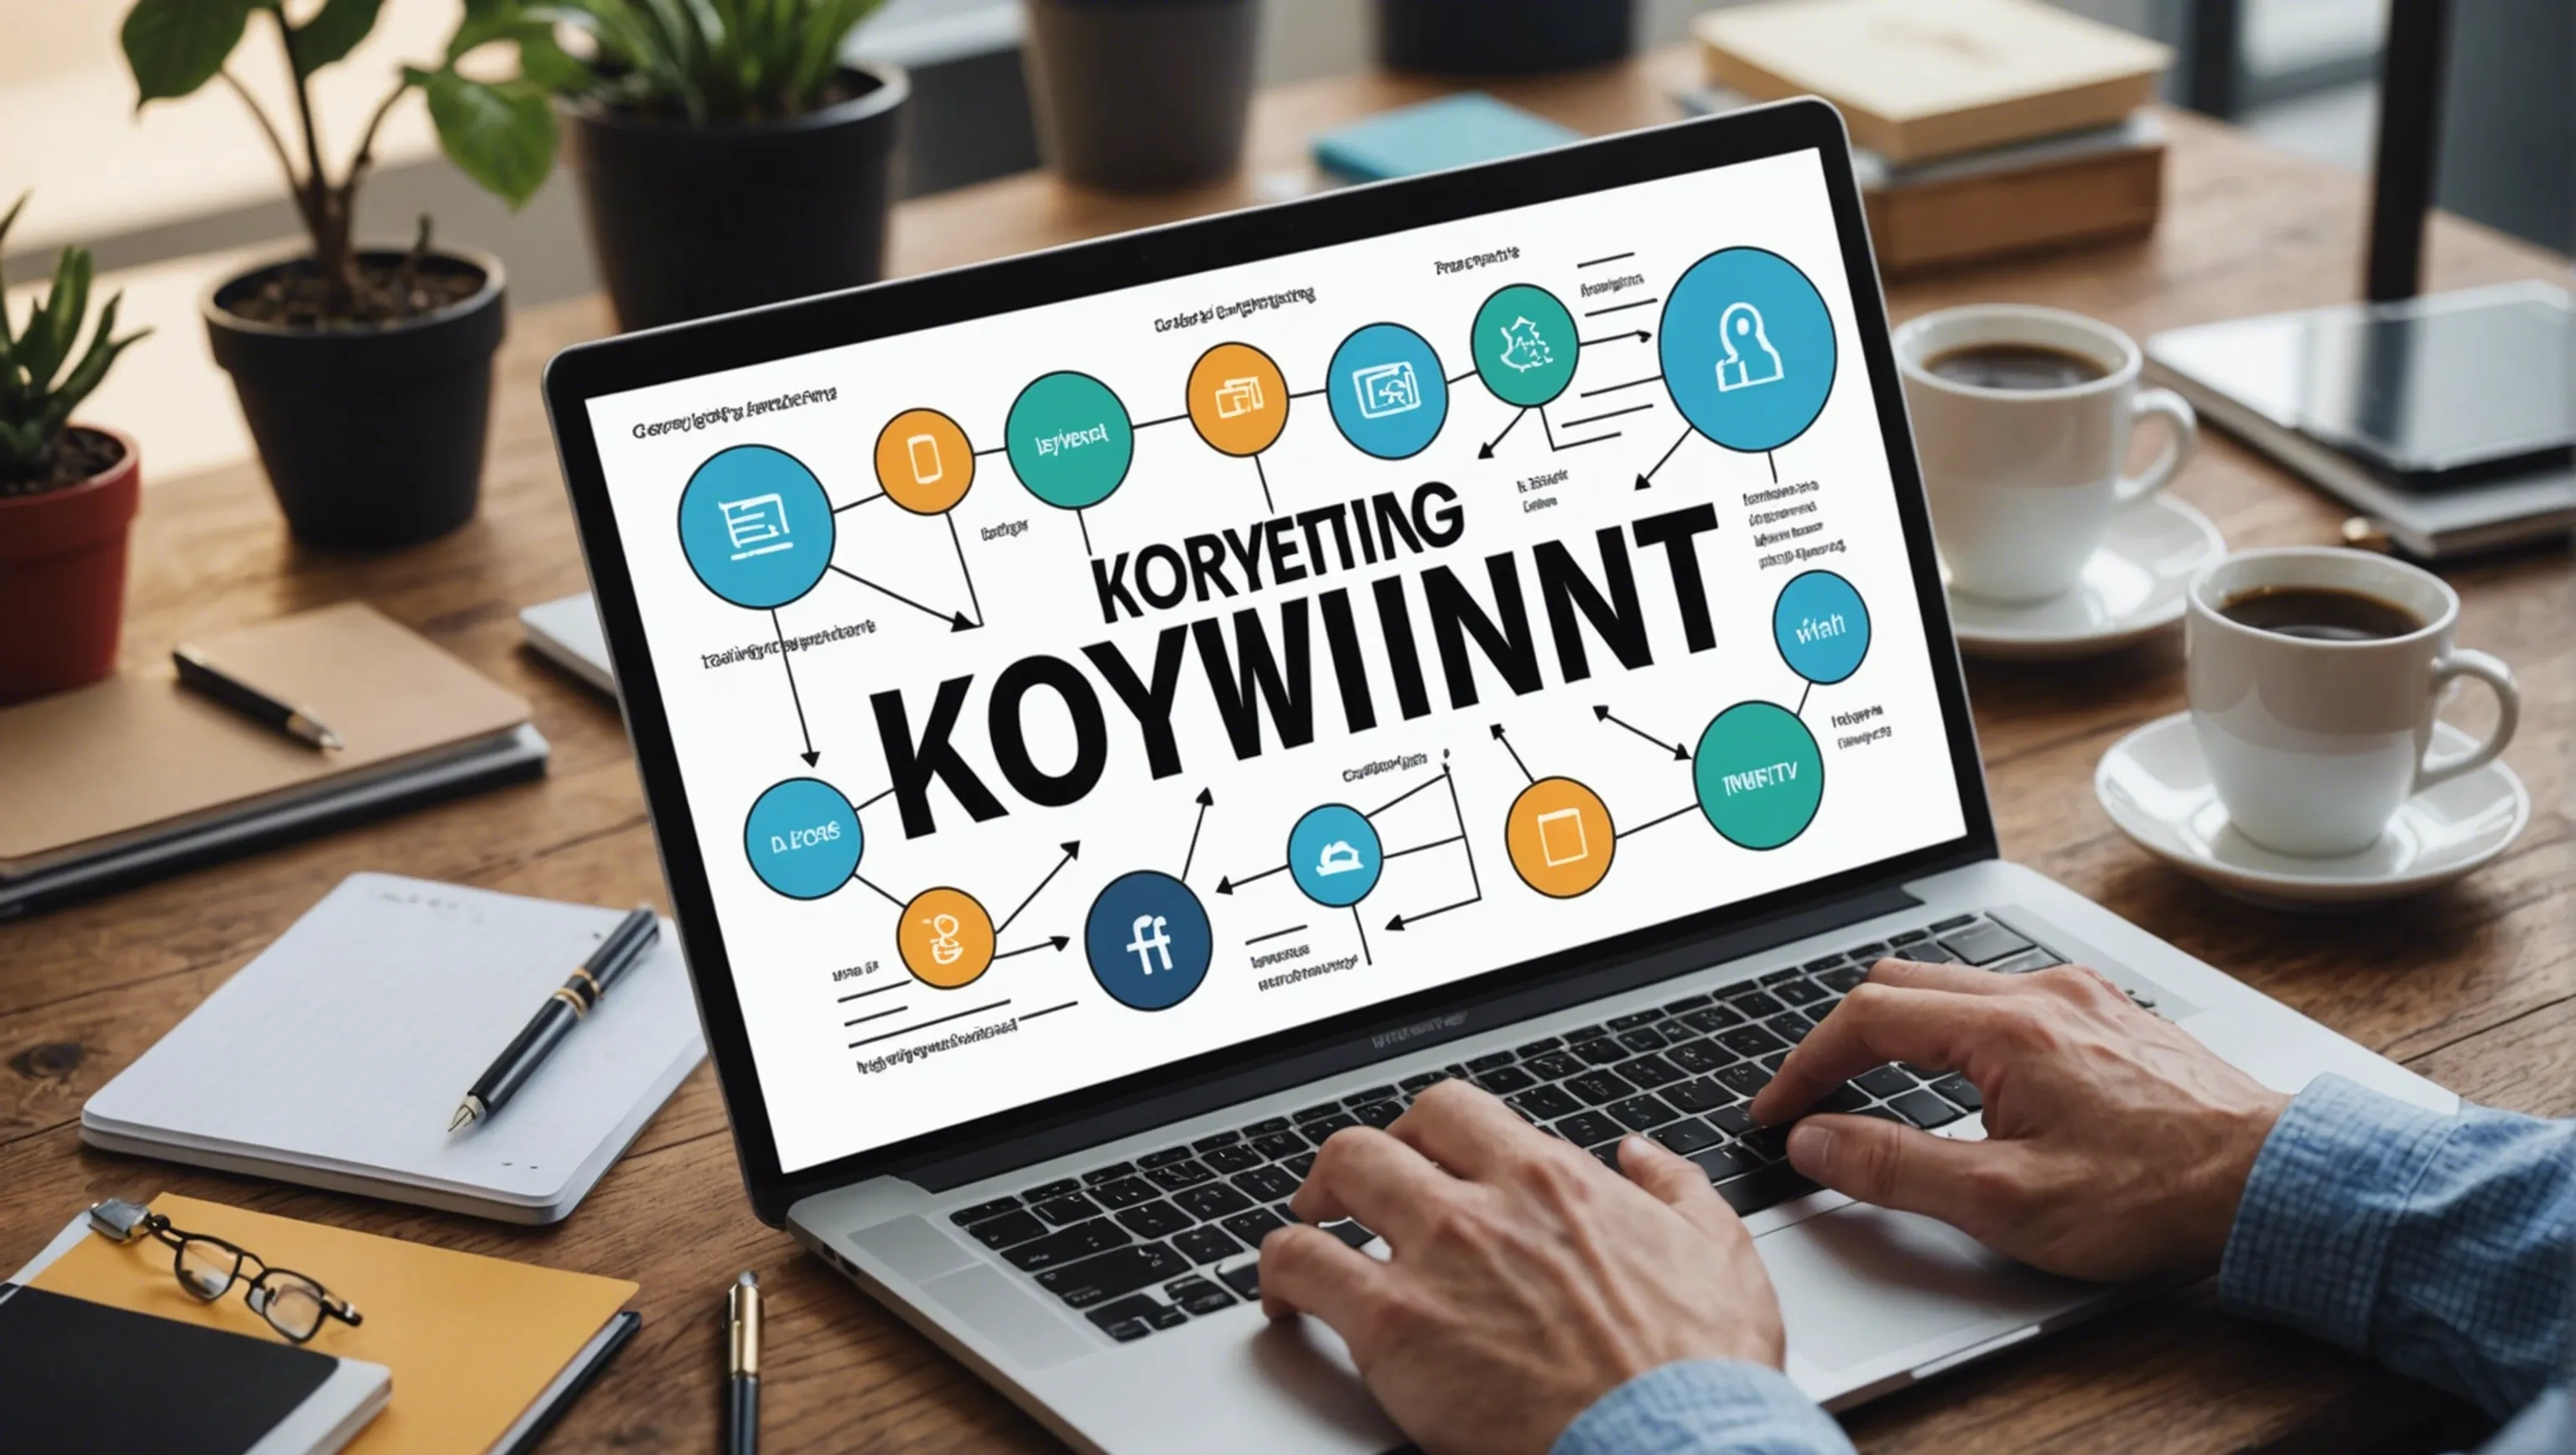 Keyword intent analysis for marketing professionals